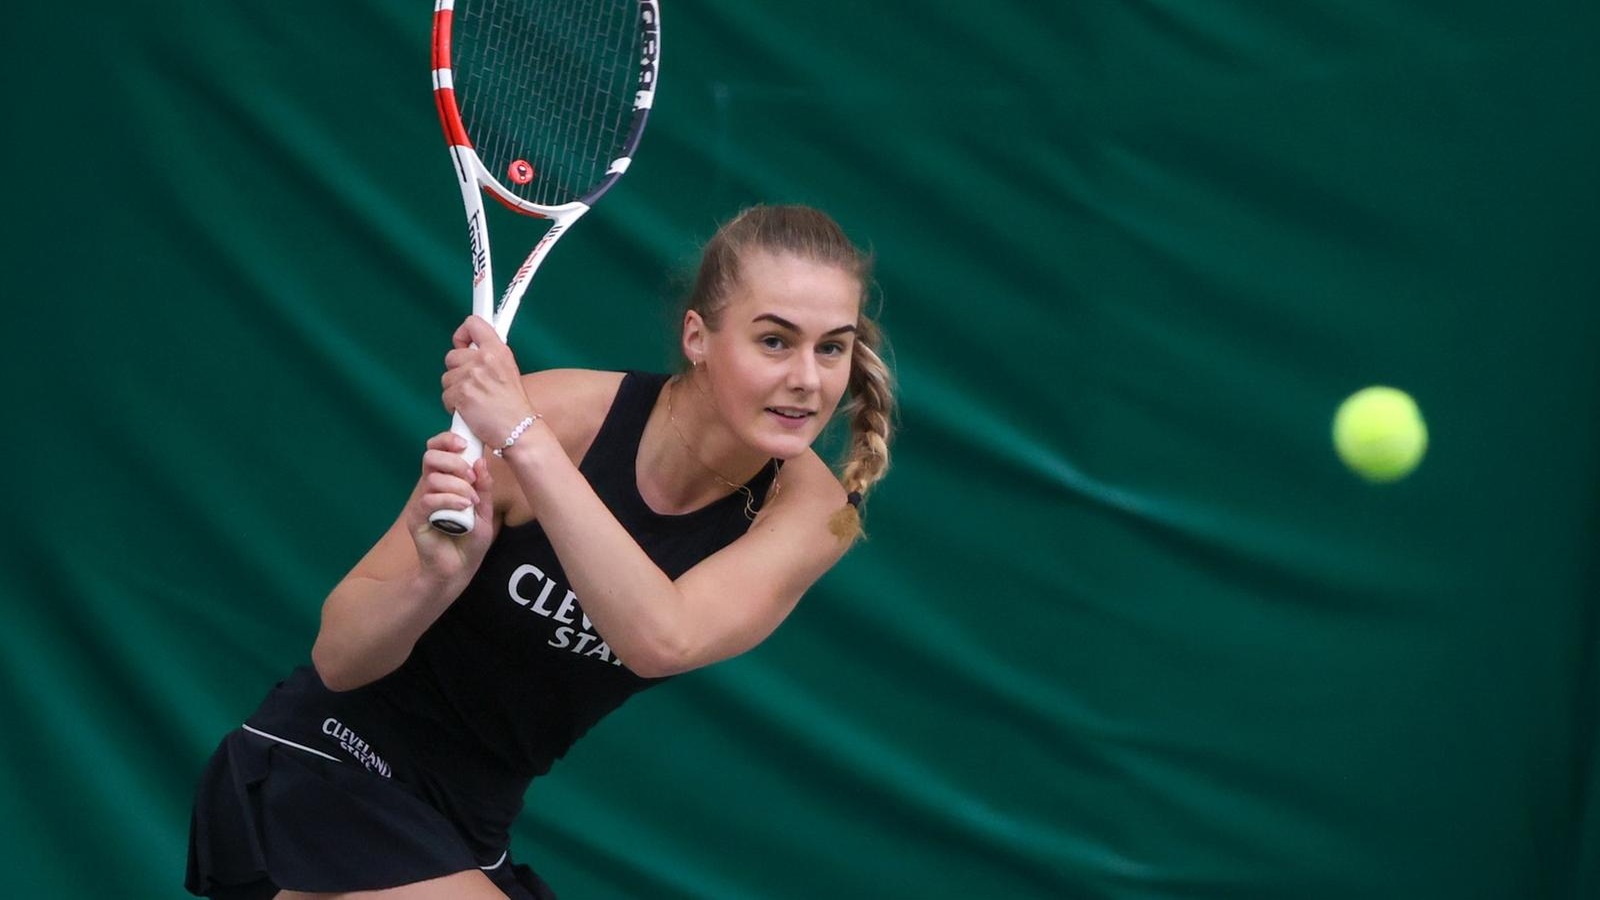 Cleveland State Women’s Tennis Team Returns To Action At Buffalo & St. Bonaventure